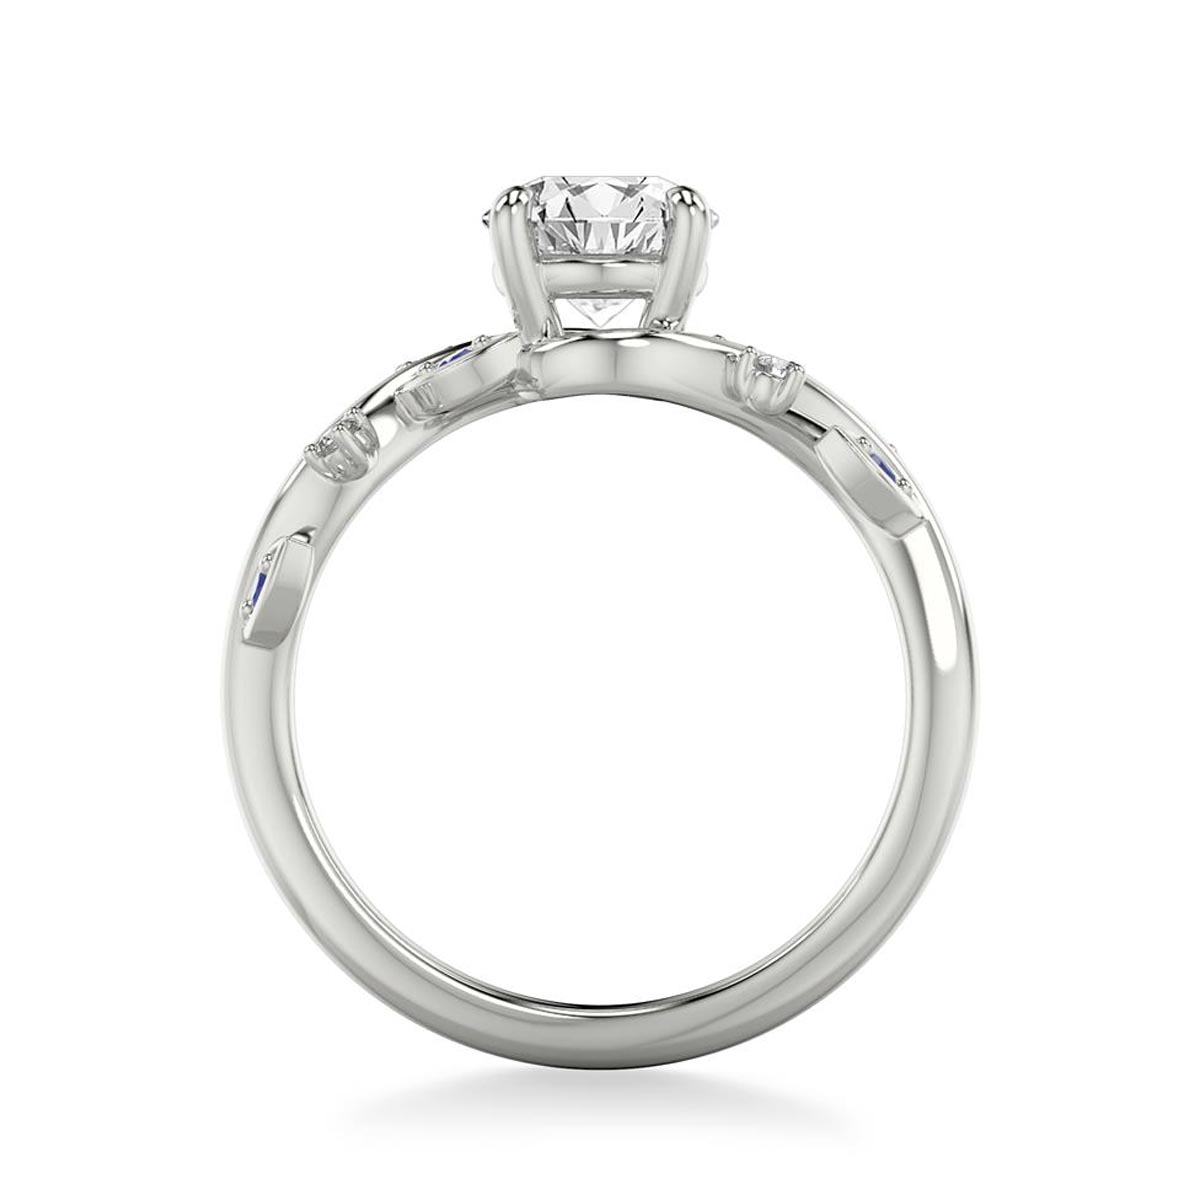 Artcarved Contemporary Floral Diamond Engagement Ring Setting in 14kt White Gold with Sapphires and Diamonds (.04ct tw)